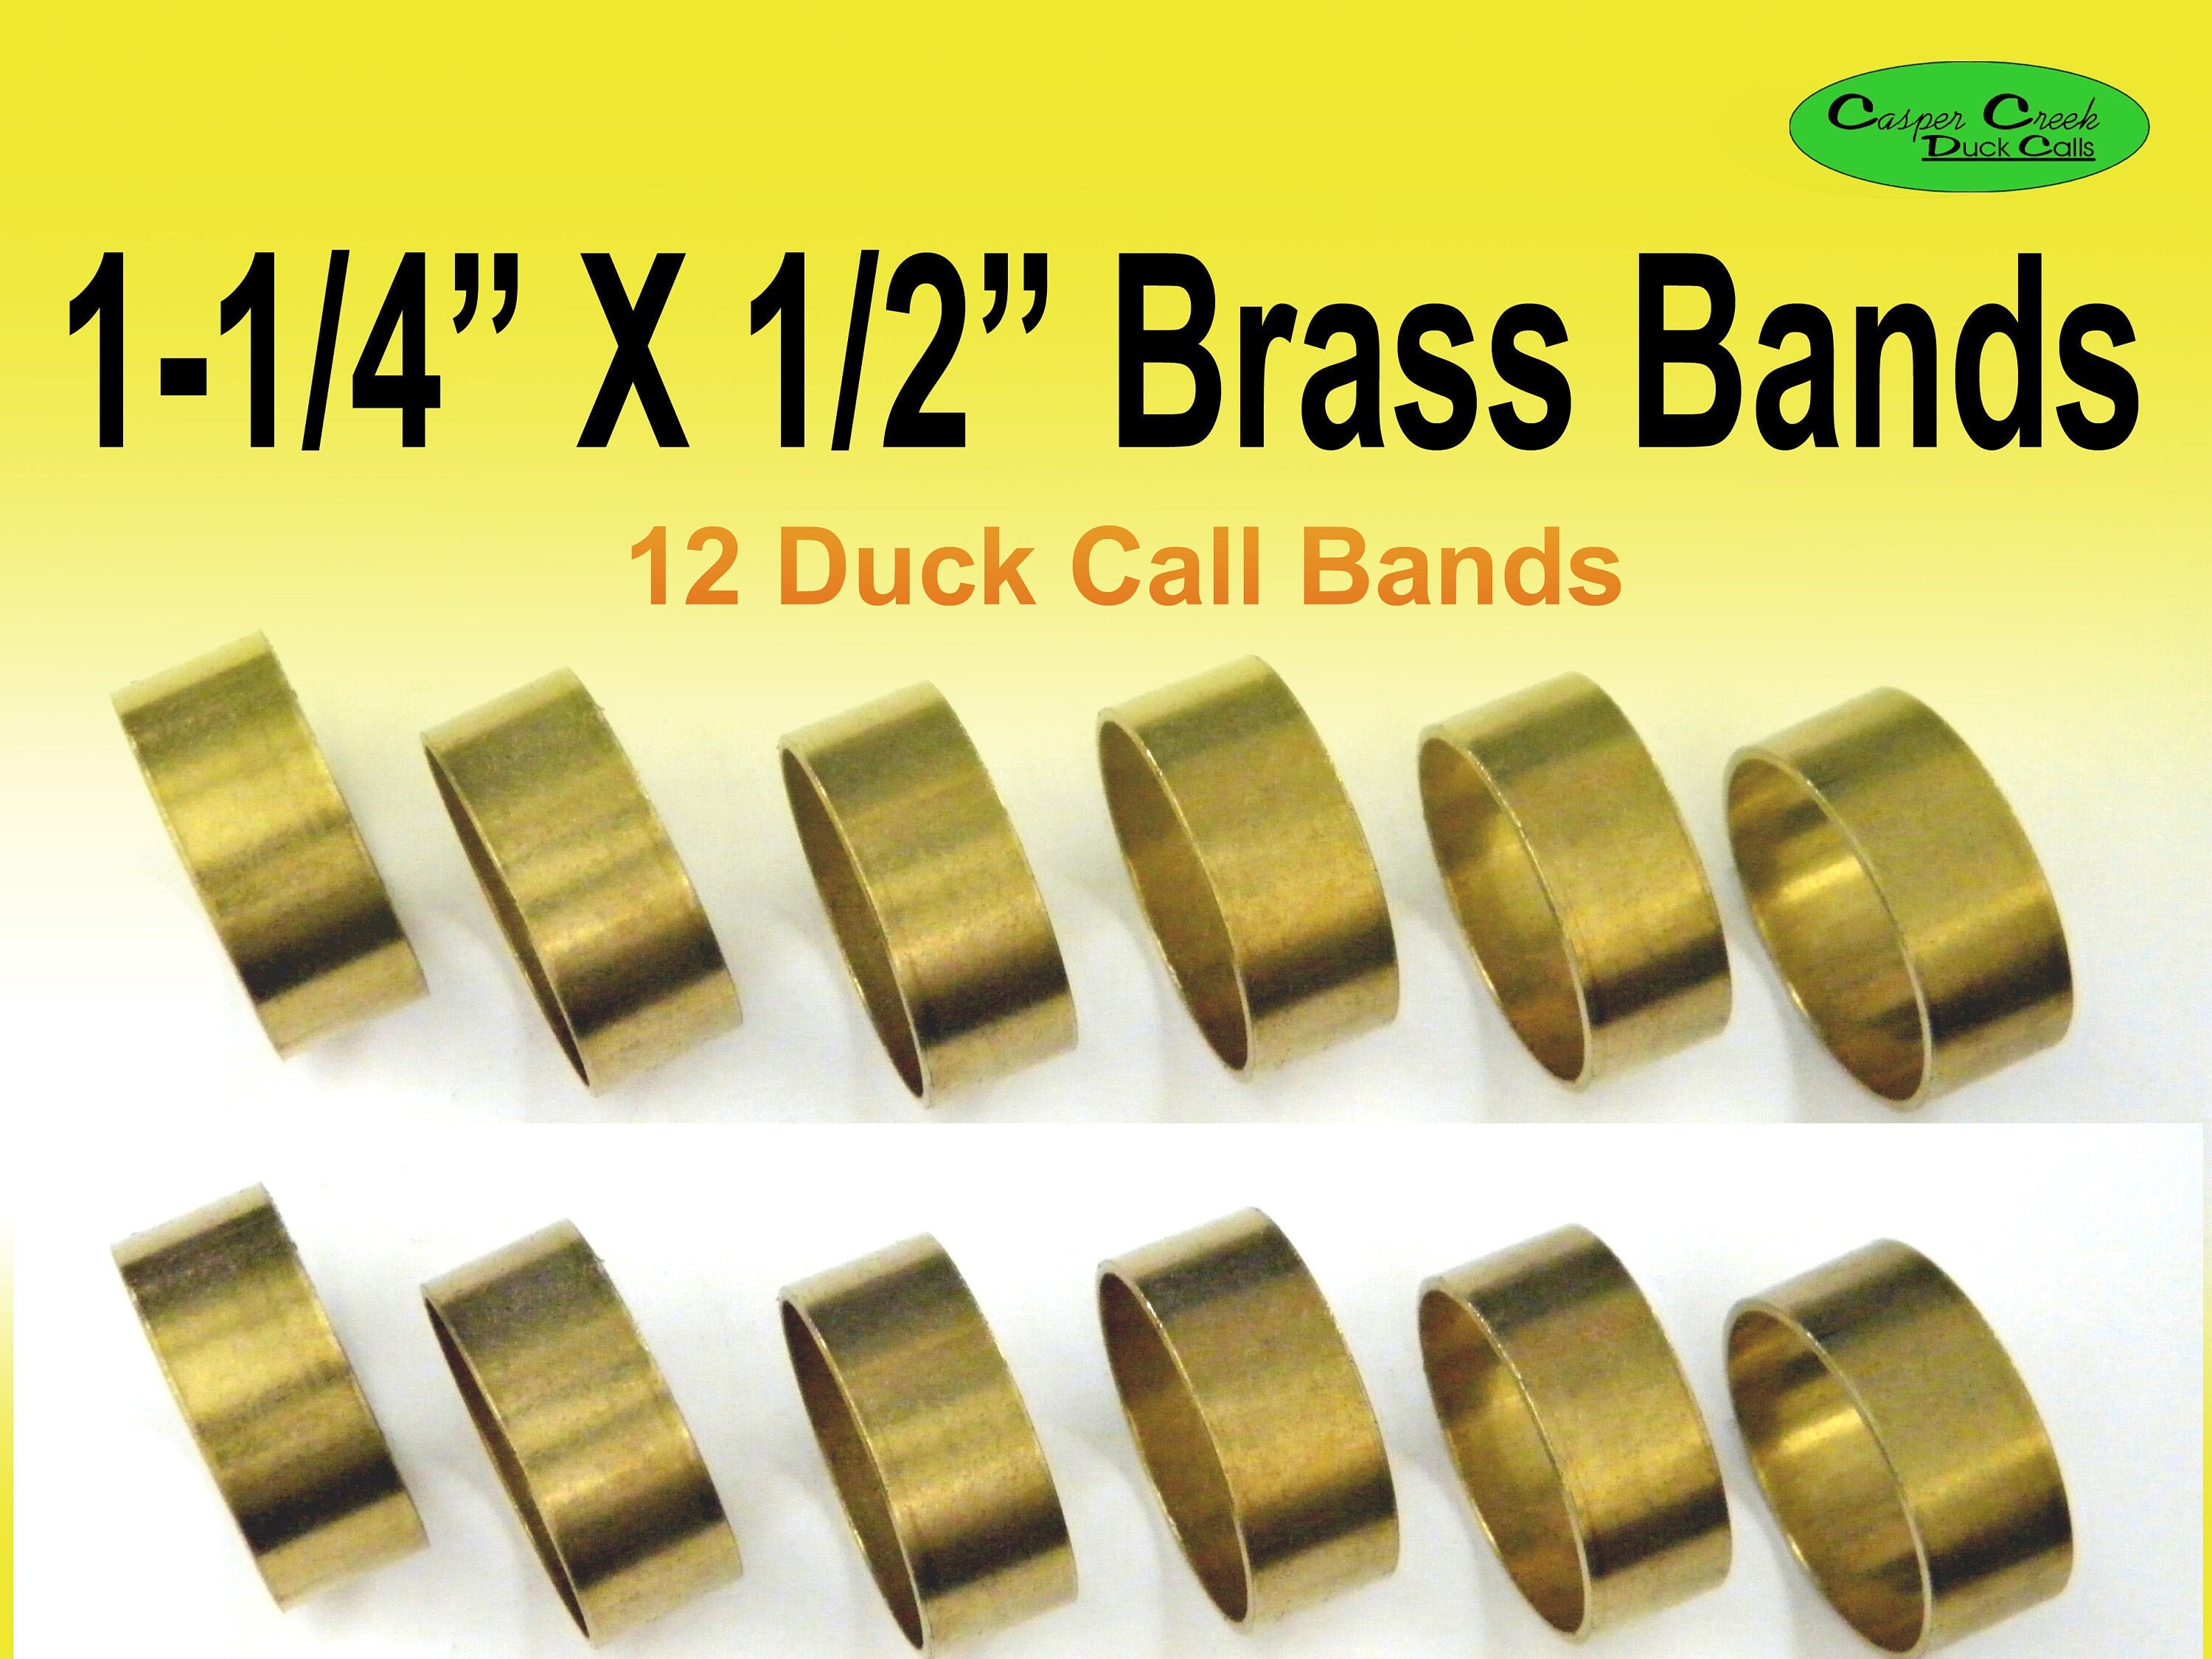 Aluminum & Brass American Made Duck Call Bands, Mandrels, and More..